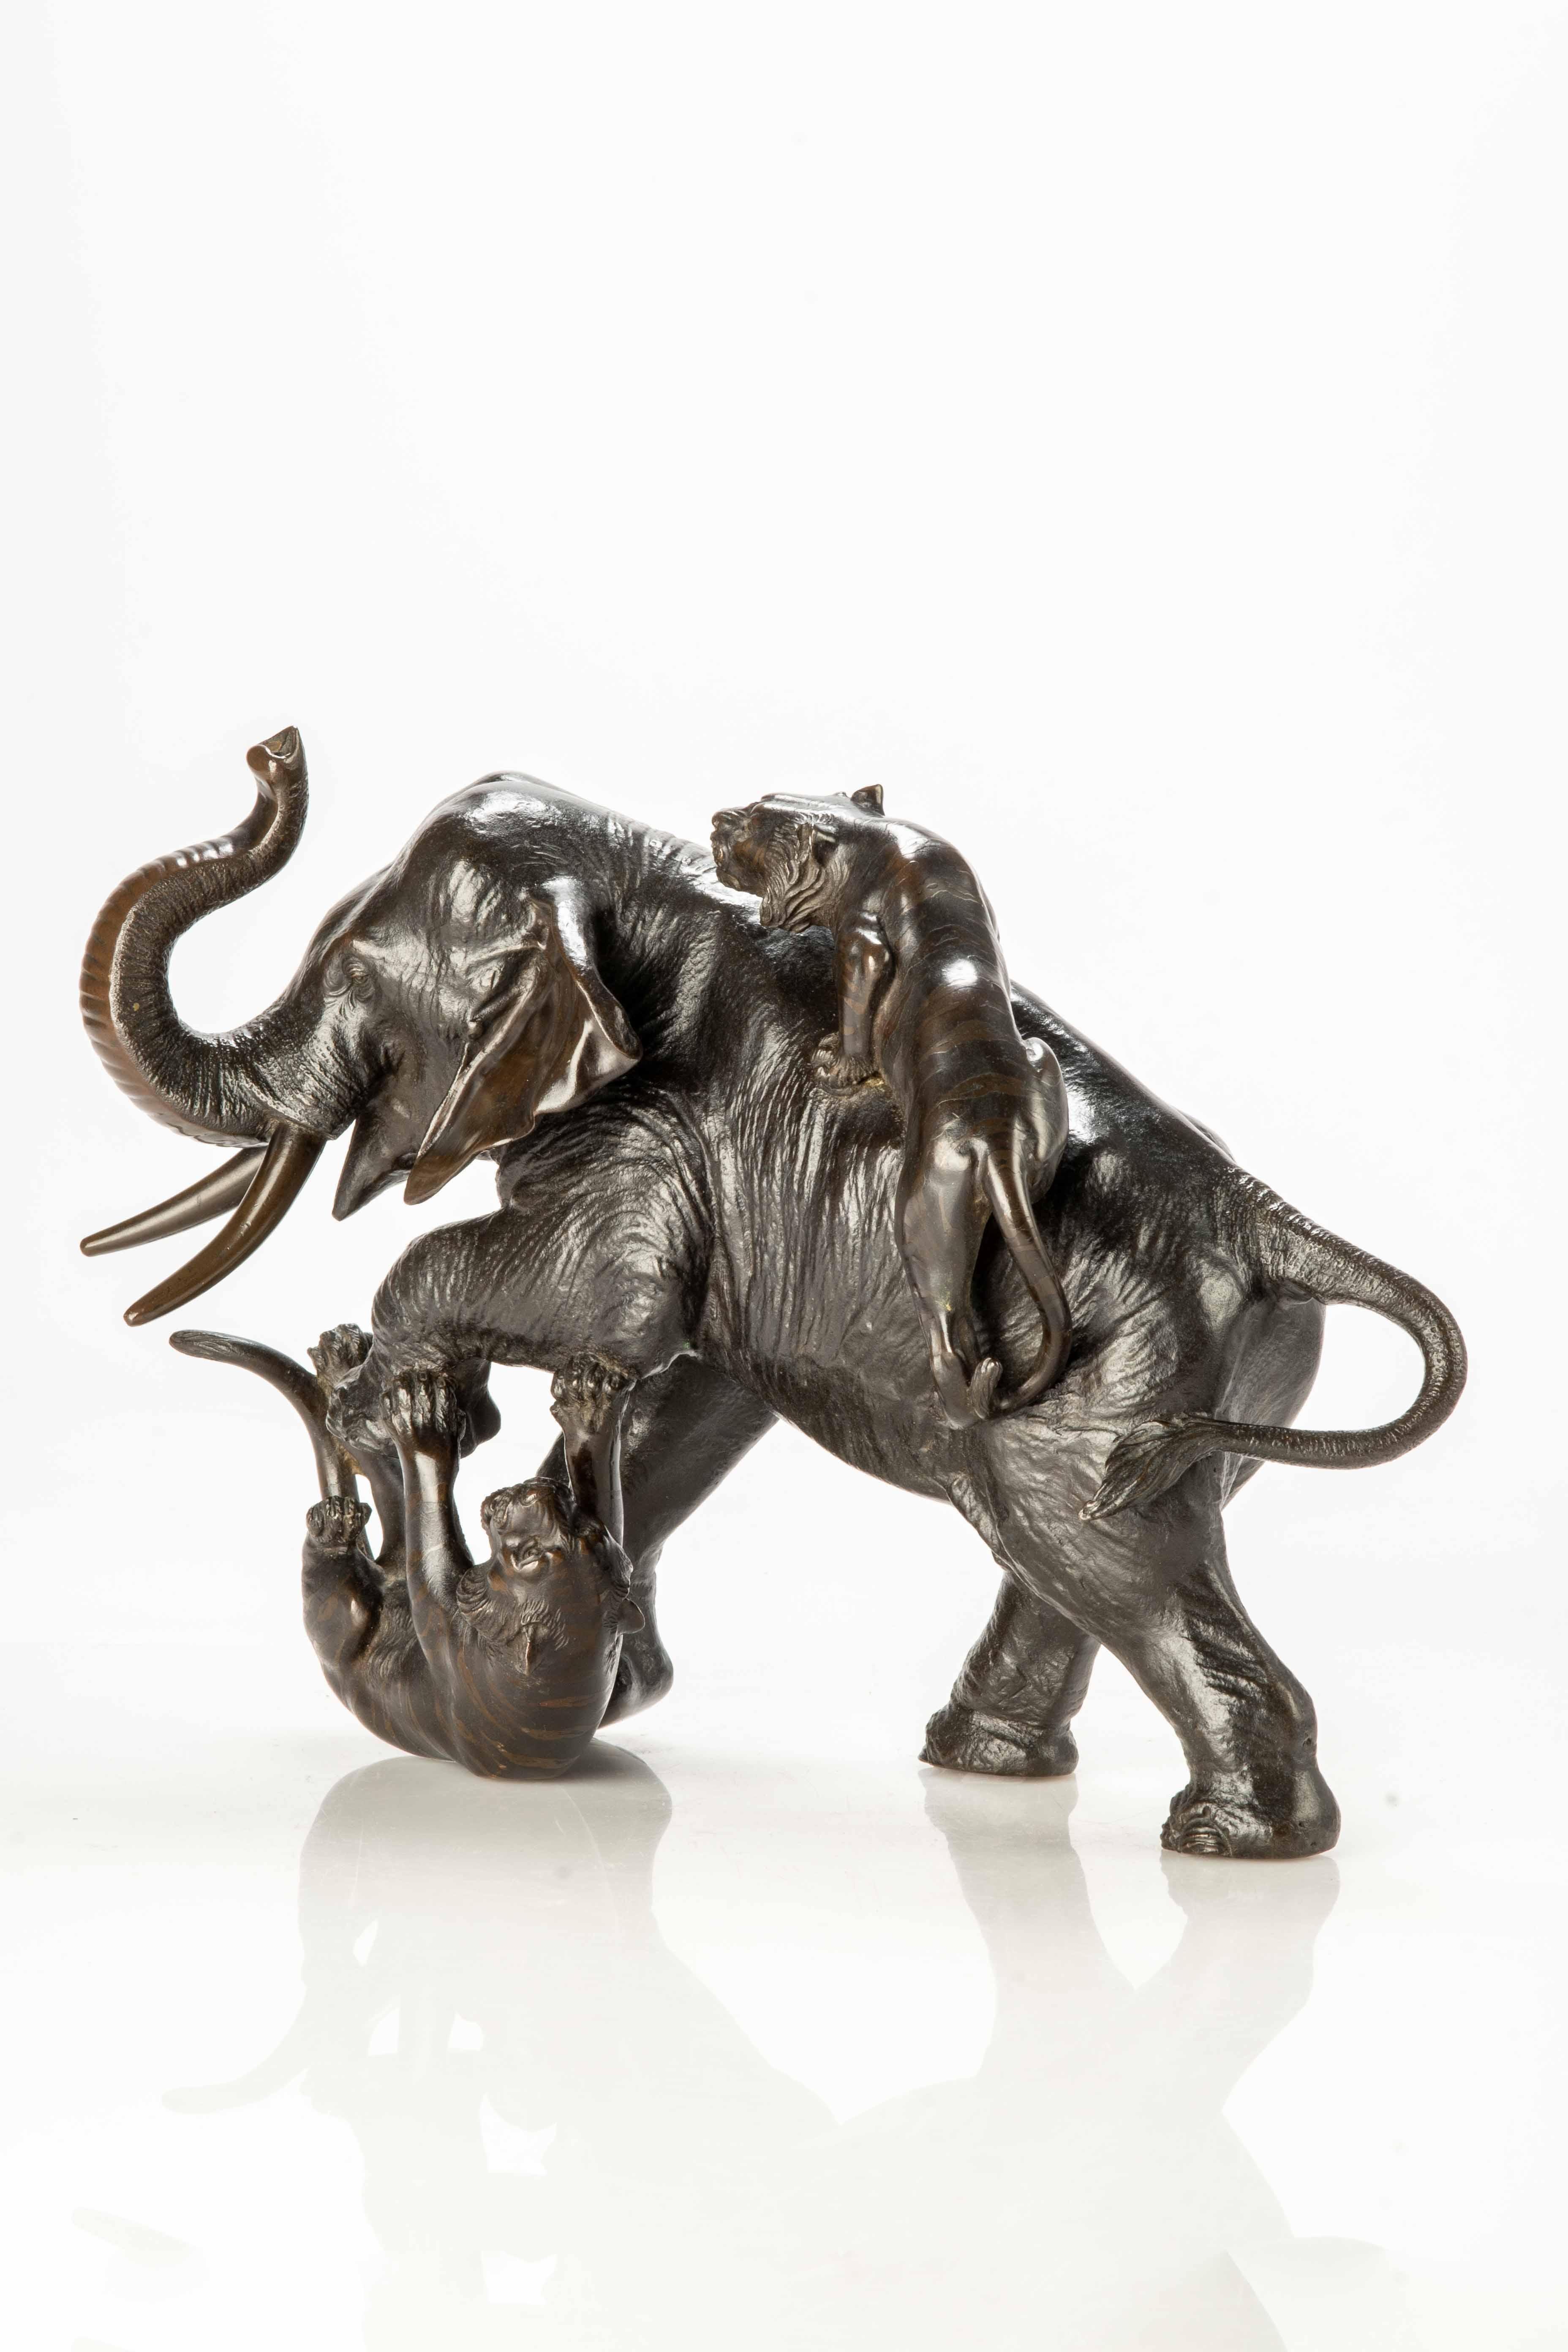 Patinated bronze okimono depicting an elephant defending itself from the attack of two tigers: one on its back and the other under its paw.

Very well worked in the details of the elephant's skin, in contrast with that of the two double patina